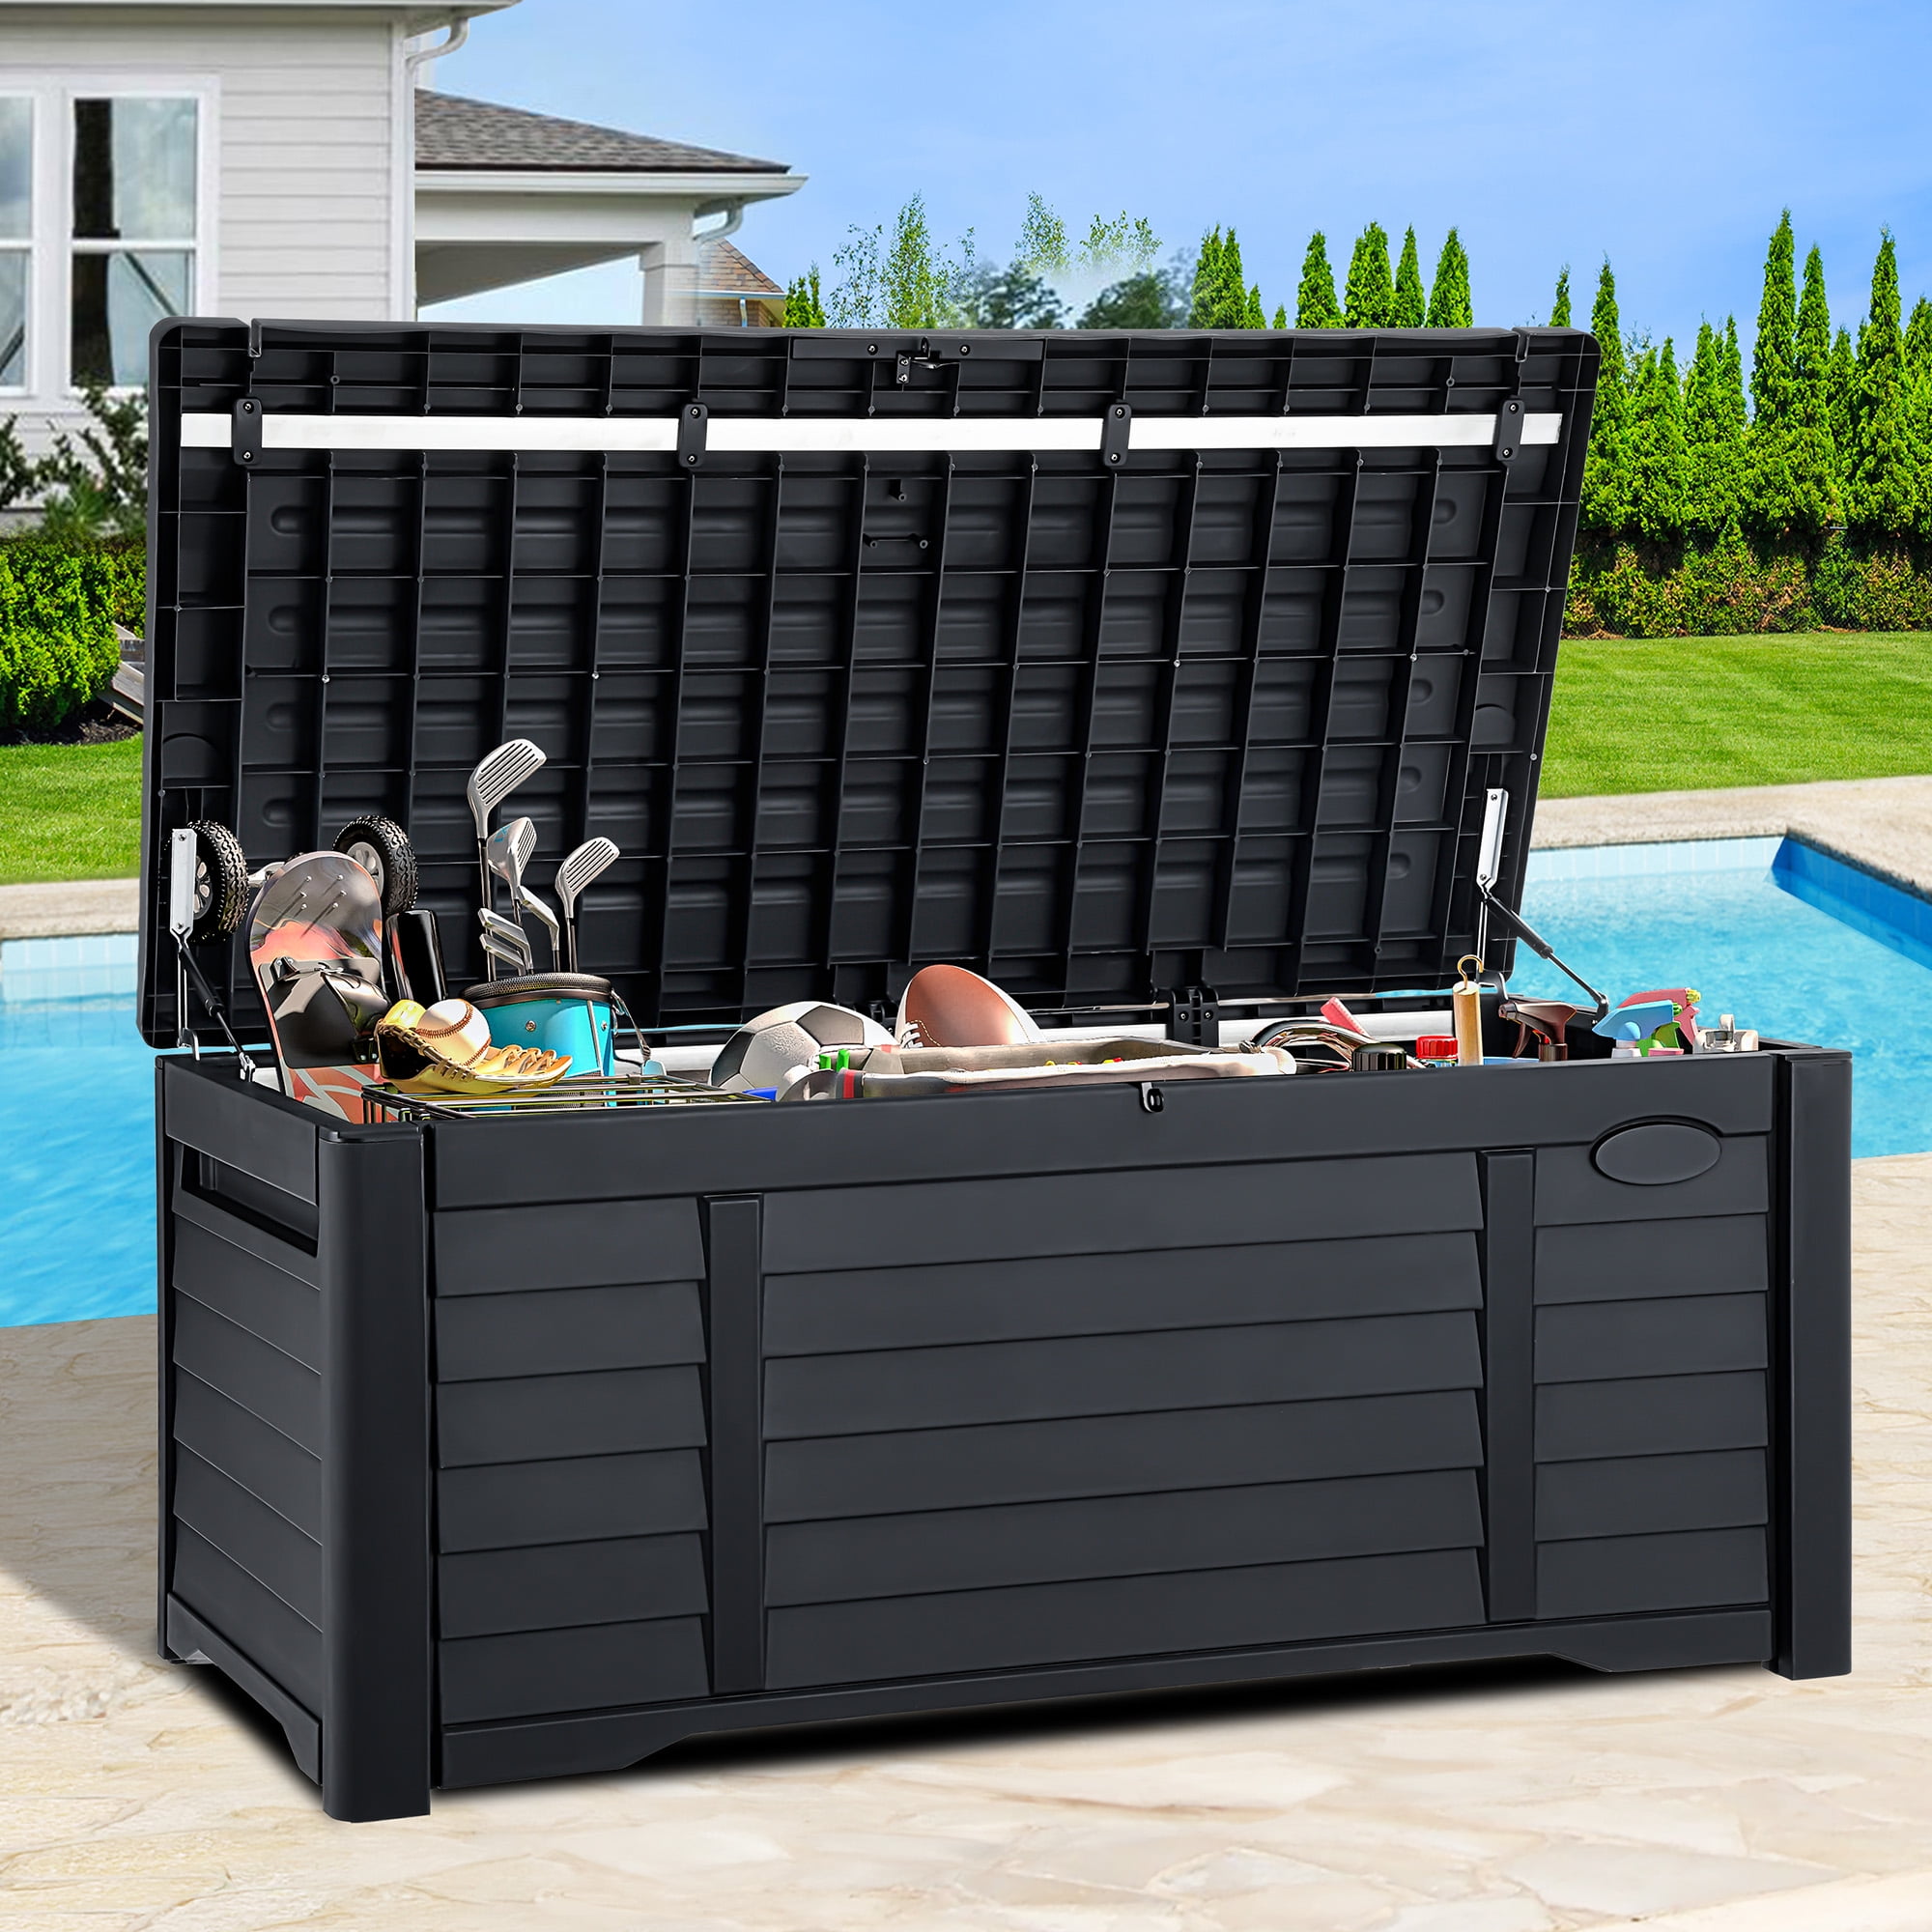 Dextrus Spacious Outdoor Large Deck Box 120 Gallon, Oversized Waterproof Patio Storage Container,Louvered Resin Outdoor Storage for Cushions, Yard